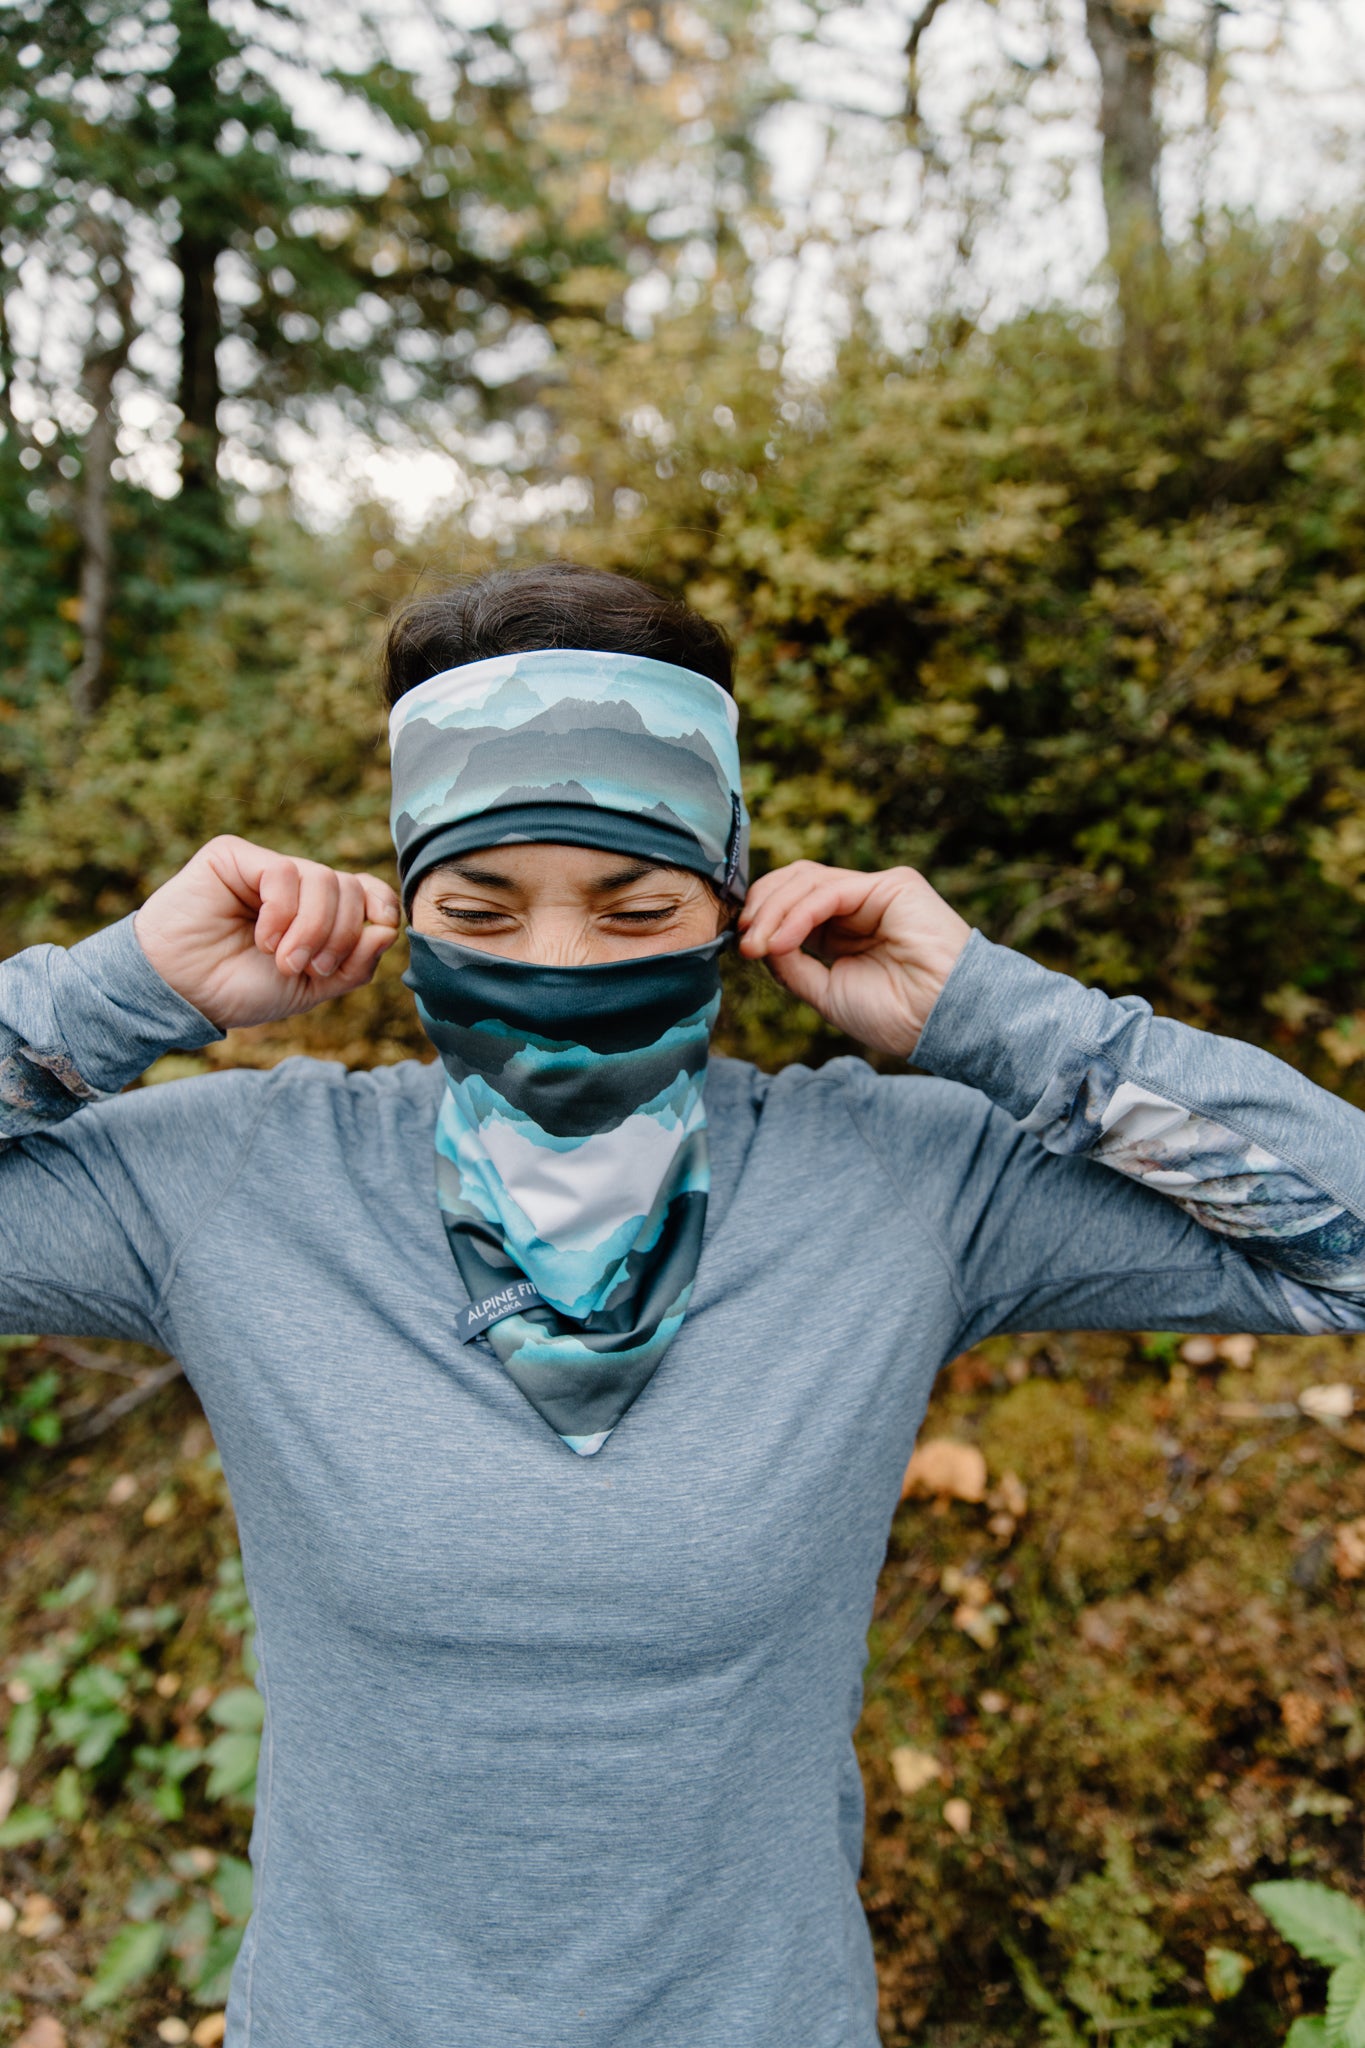 alpine fit merino wool headband with neck gaiter and base layer top